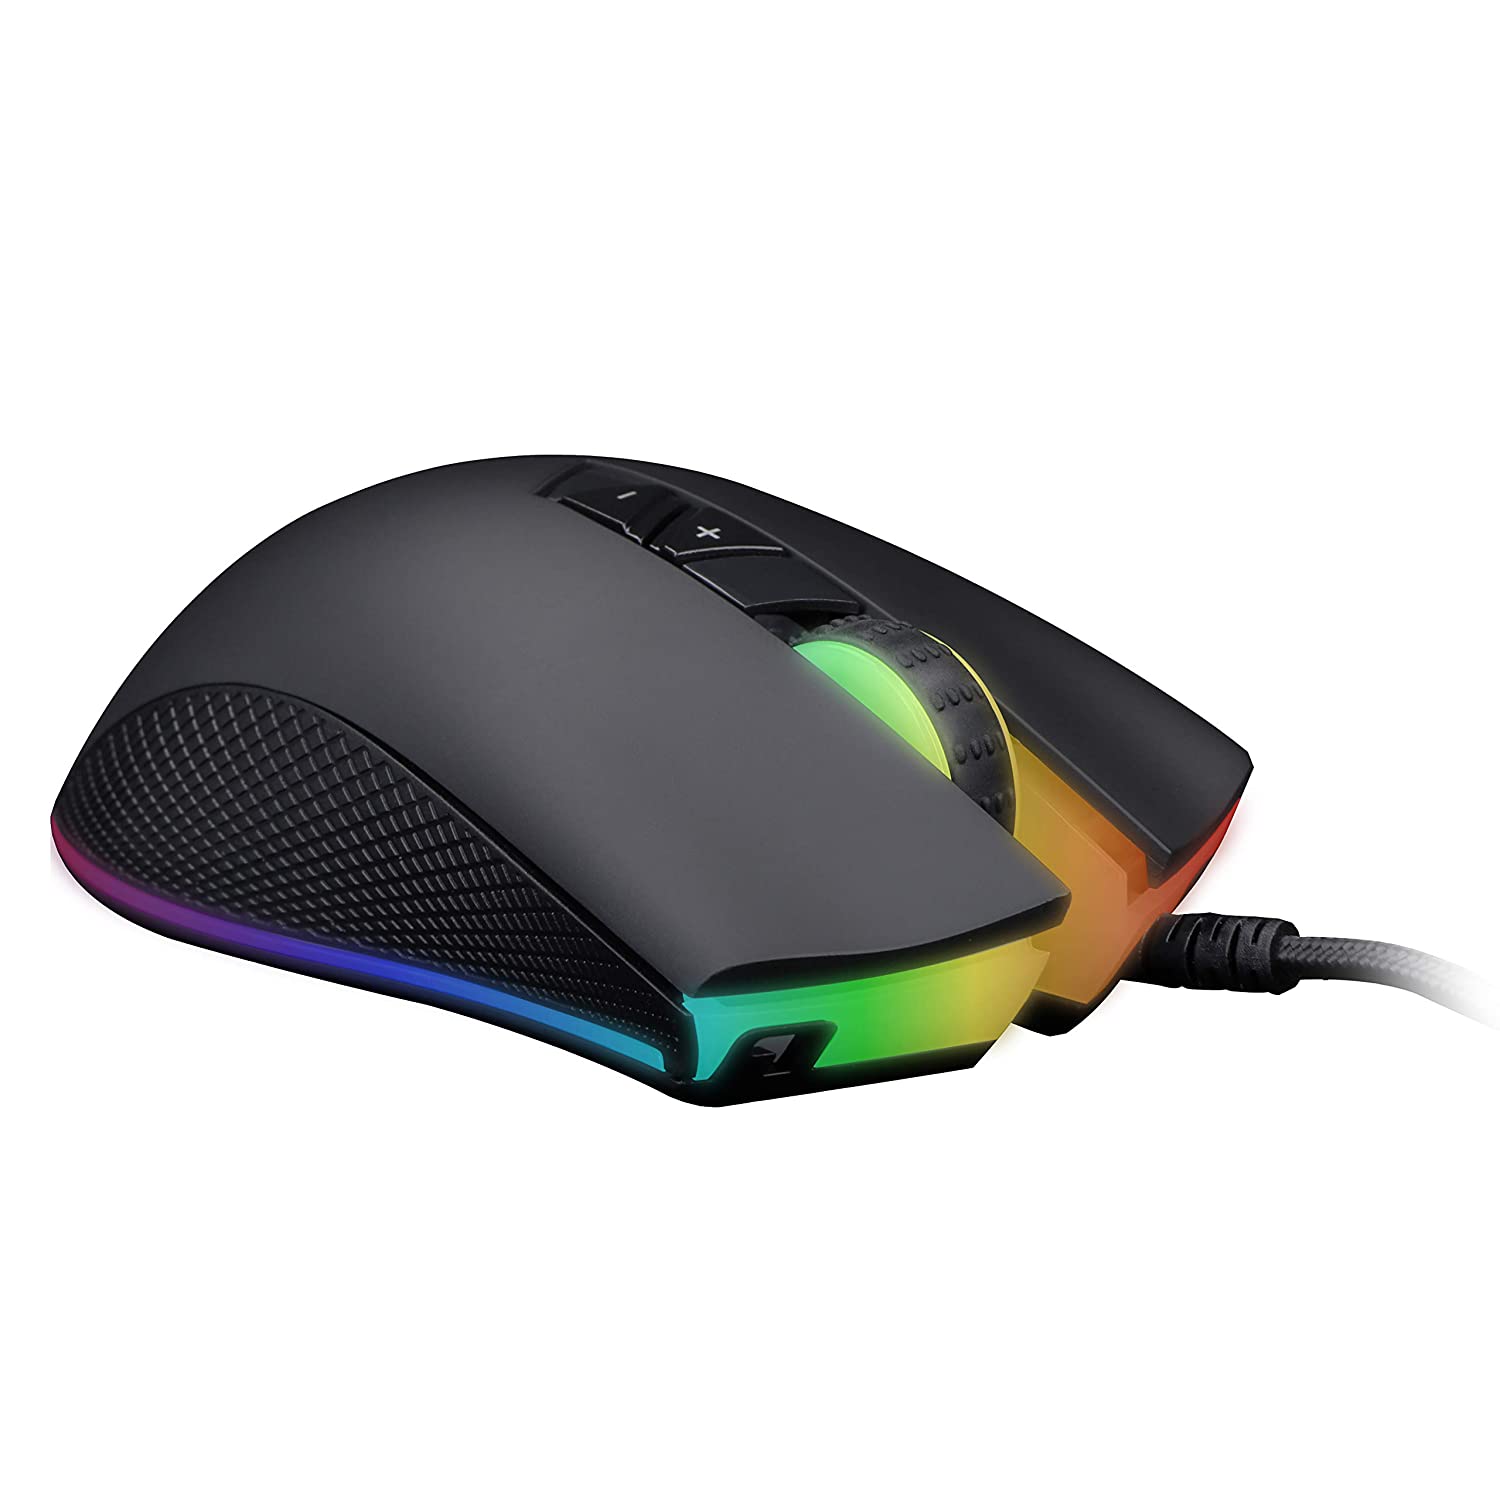 7th gaming mouse